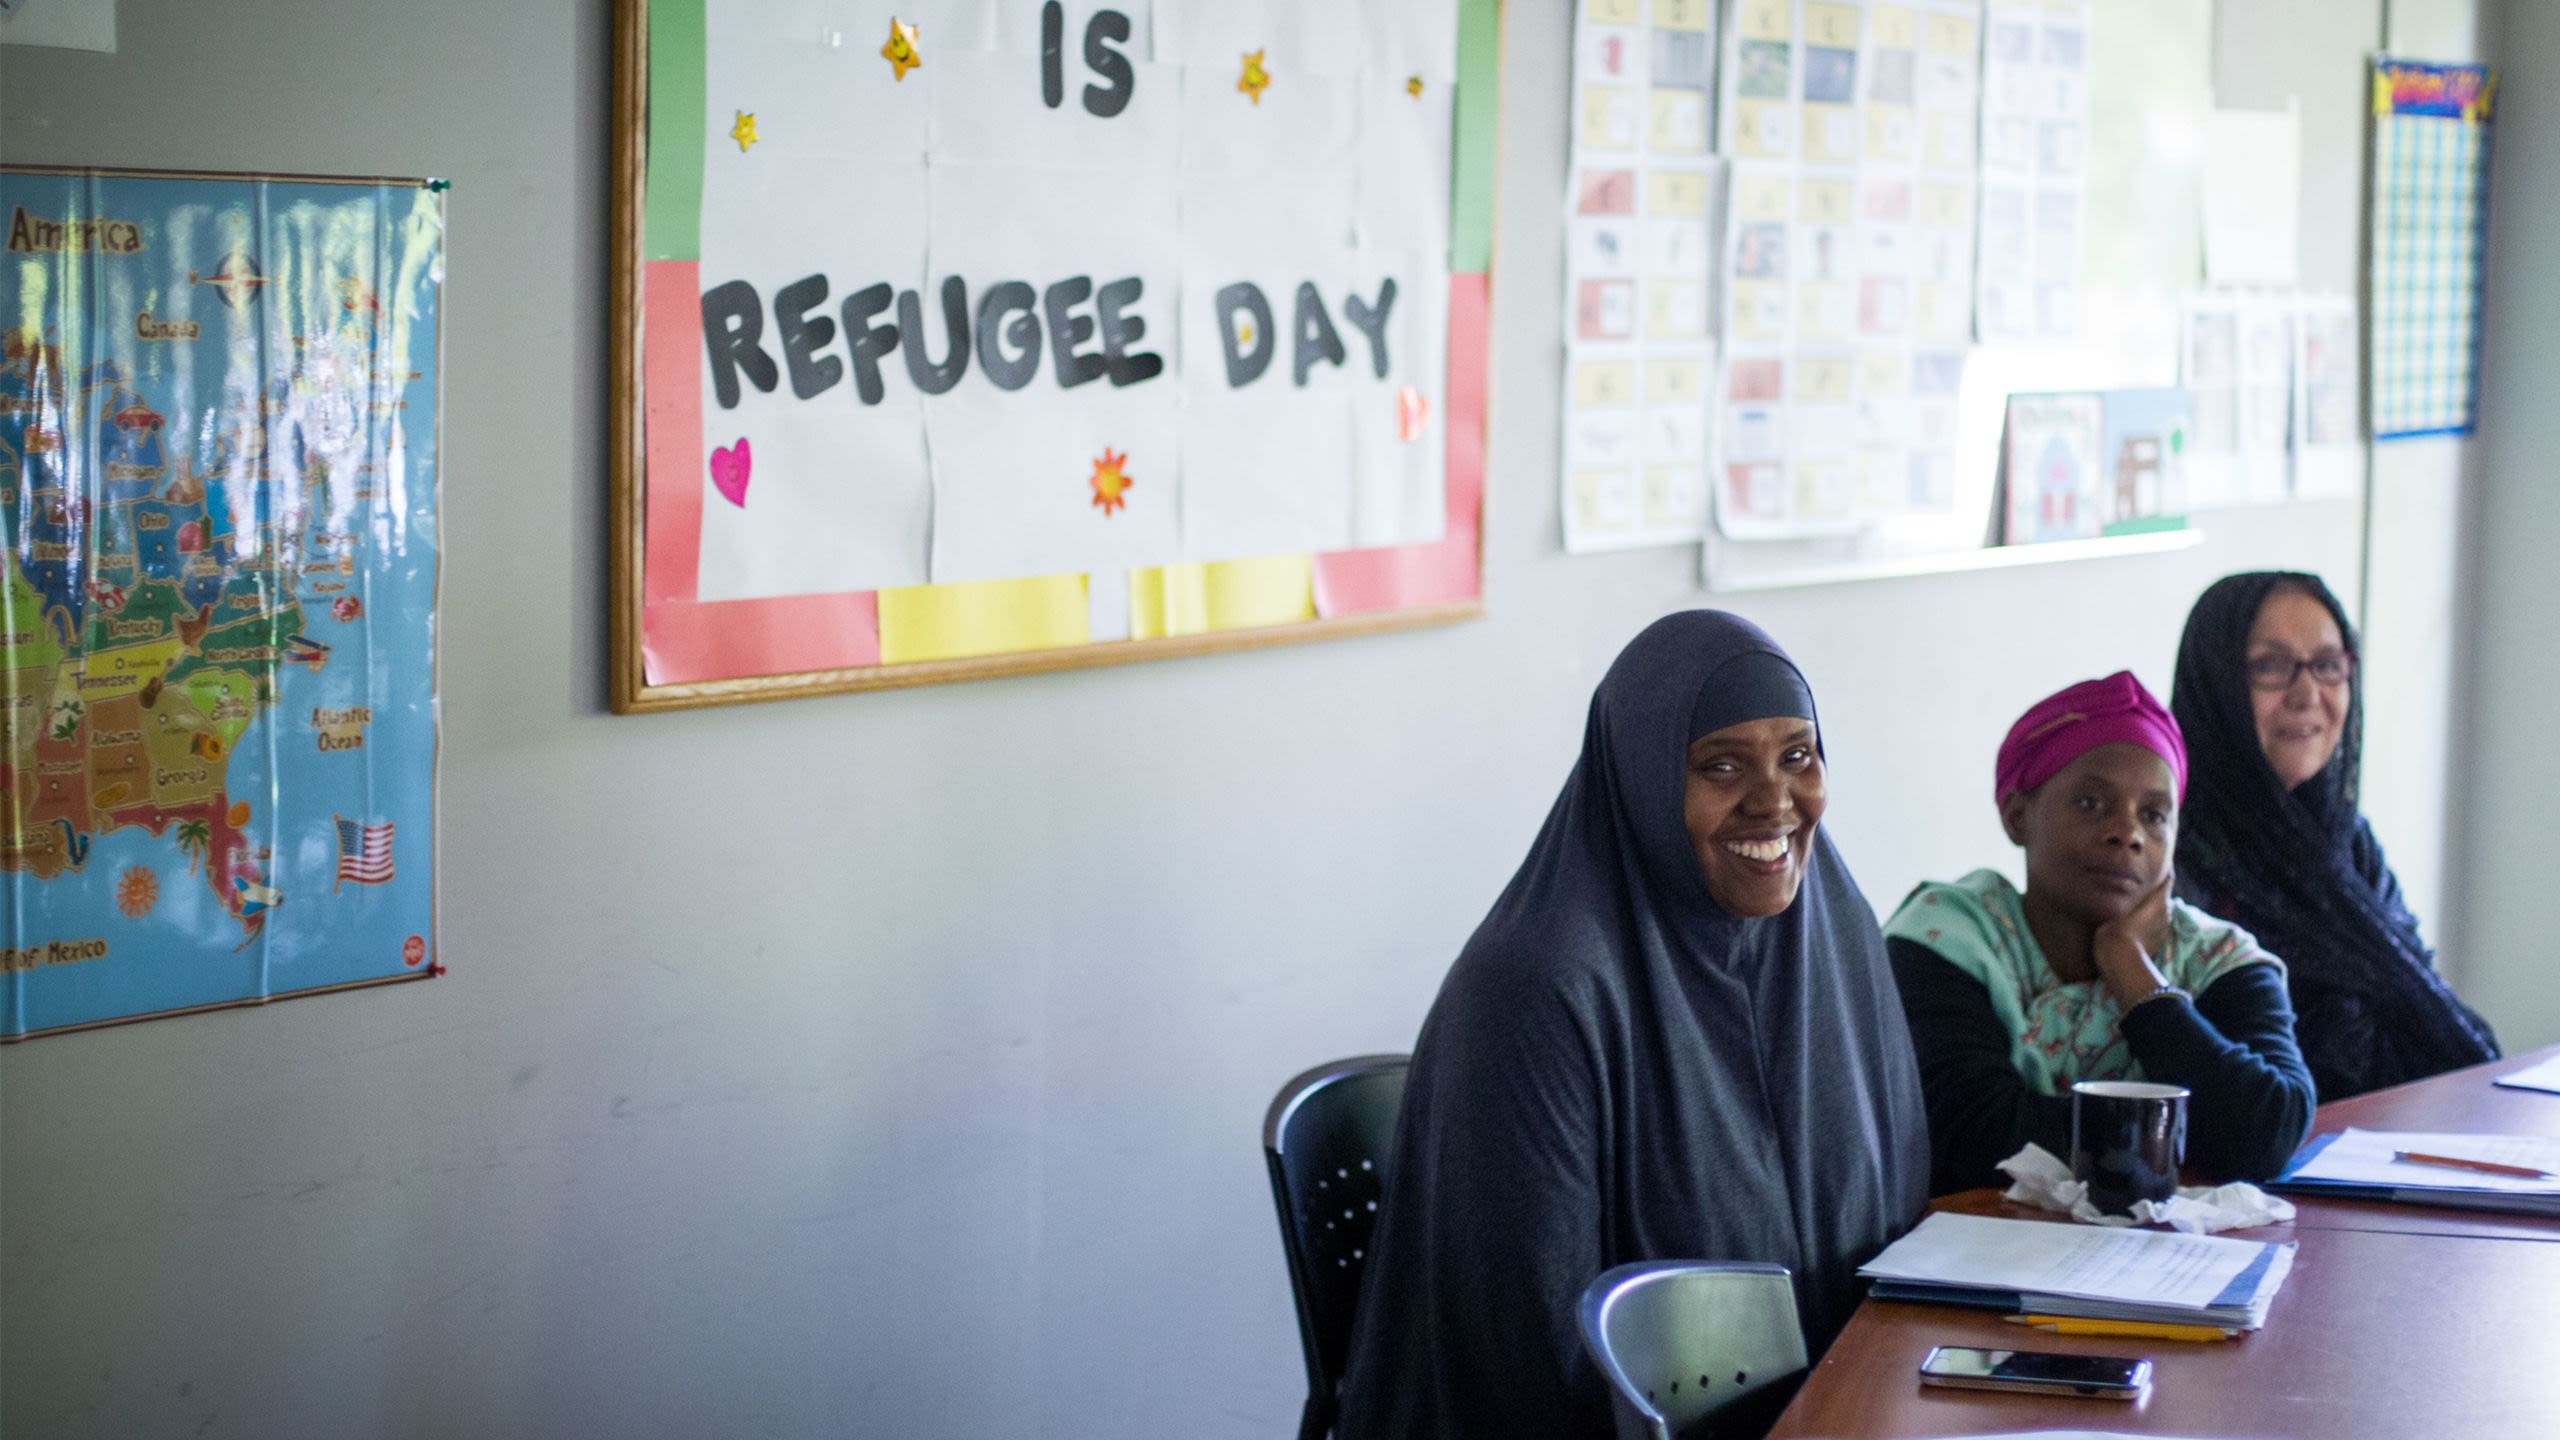 Three women wearing head scarves sit at a table during a class provided by the International Rescue Committee